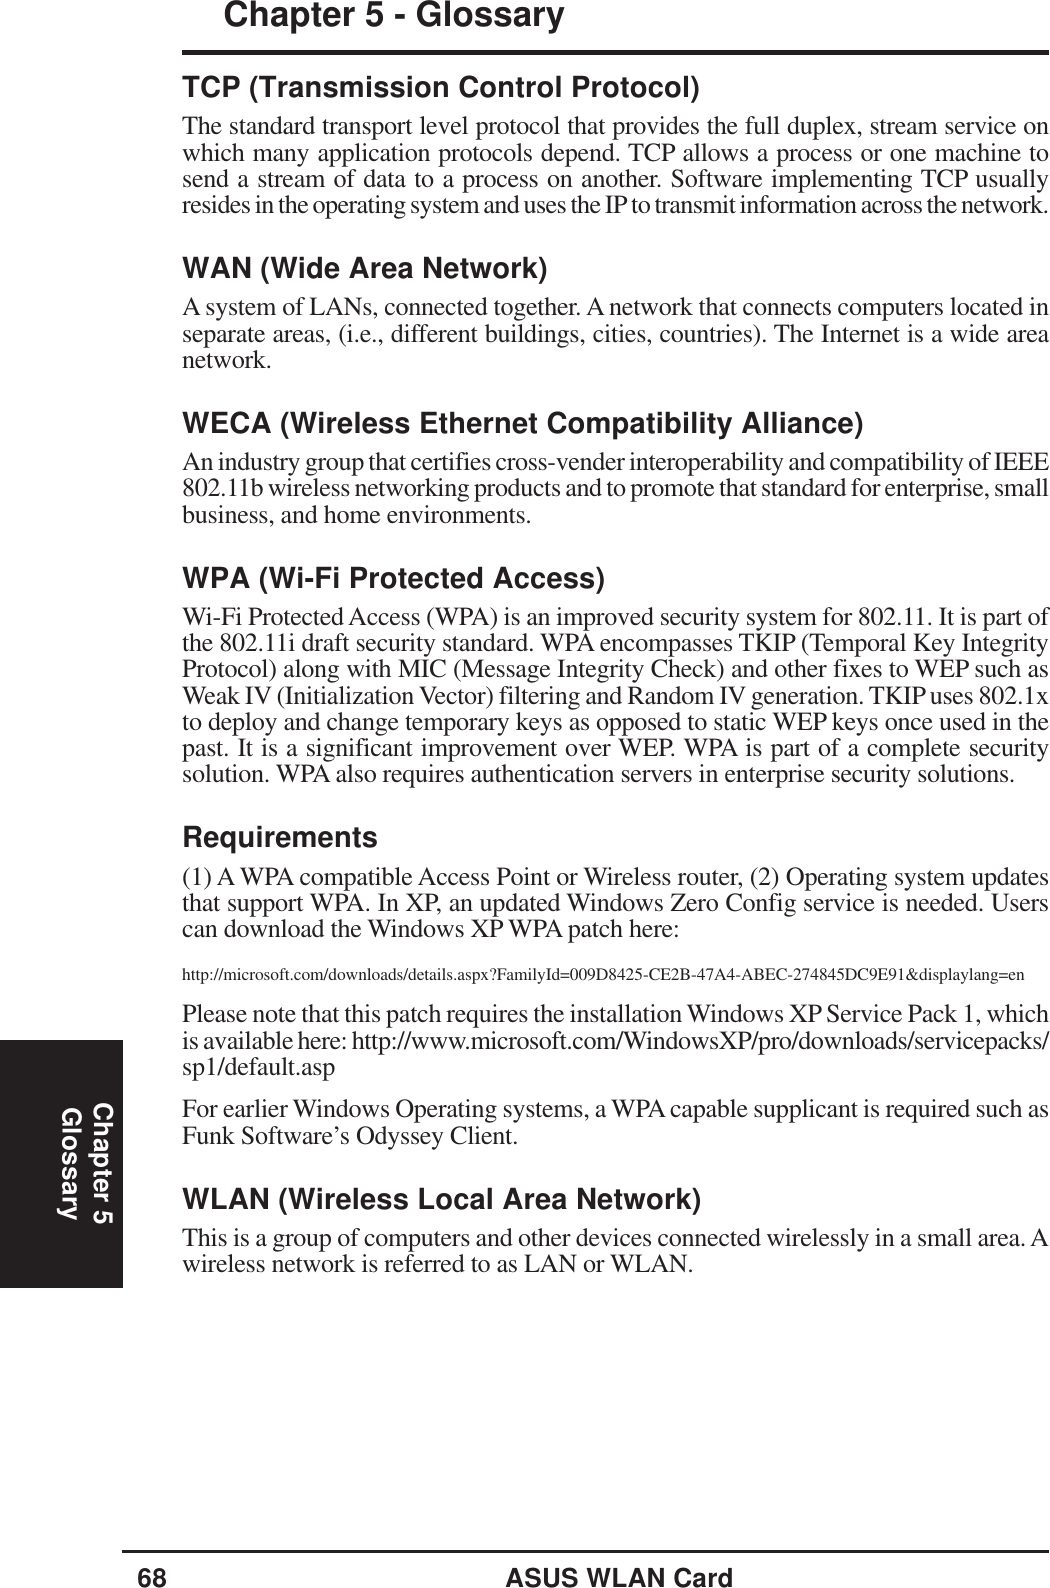 68 ASUS WLAN CardChapter 5Chapter 5 - GlossaryGlossaryTCP (Transmission Control Protocol)The standard transport level protocol that provides the full duplex, stream service onwhich many application protocols depend. TCP allows a process or one machine tosend a stream of data to a process on another. Software implementing TCP usuallyresides in the operating system and uses the IP to transmit information across the network.WAN (Wide Area Network)A system of LANs, connected together. A network that connects computers located inseparate areas, (i.e., different buildings, cities, countries). The Internet is a wide areanetwork.WECA (Wireless Ethernet Compatibility Alliance)An industry group that certifies cross-vender interoperability and compatibility of IEEE802.11b wireless networking products and to promote that standard for enterprise, smallbusiness, and home environments.WPA (Wi-Fi Protected Access)Wi-Fi Protected Access (WPA) is an improved security system for 802.11. It is part ofthe 802.11i draft security standard. WPA encompasses TKIP (Temporal Key IntegrityProtocol) along with MIC (Message Integrity Check) and other fixes to WEP such asWeak IV (Initialization Vector) filtering and Random IV generation. TKIP uses 802.1xto deploy and change temporary keys as opposed to static WEP keys once used in thepast. It is a significant improvement over WEP. WPA is part of a complete securitysolution. WPA also requires authentication servers in enterprise security solutions.Requirements(1) A WPA compatible Access Point or Wireless router, (2) Operating system updatesthat support WPA. In XP, an updated Windows Zero Config service is needed. Userscan download the Windows XP WPA patch here:http://microsoft.com/downloads/details.aspx?FamilyId=009D8425-CE2B-47A4-ABEC-274845DC9E91&amp;displaylang=enPlease note that this patch requires the installation Windows XP Service Pack 1, whichis available here: http://www.microsoft.com/WindowsXP/pro/downloads/servicepacks/sp1/default.aspFor earlier Windows Operating systems, a WPA capable supplicant is required such asFunk Software’s Odyssey Client.WLAN (Wireless Local Area Network)This is a group of computers and other devices connected wirelessly in a small area. Awireless network is referred to as LAN or WLAN.